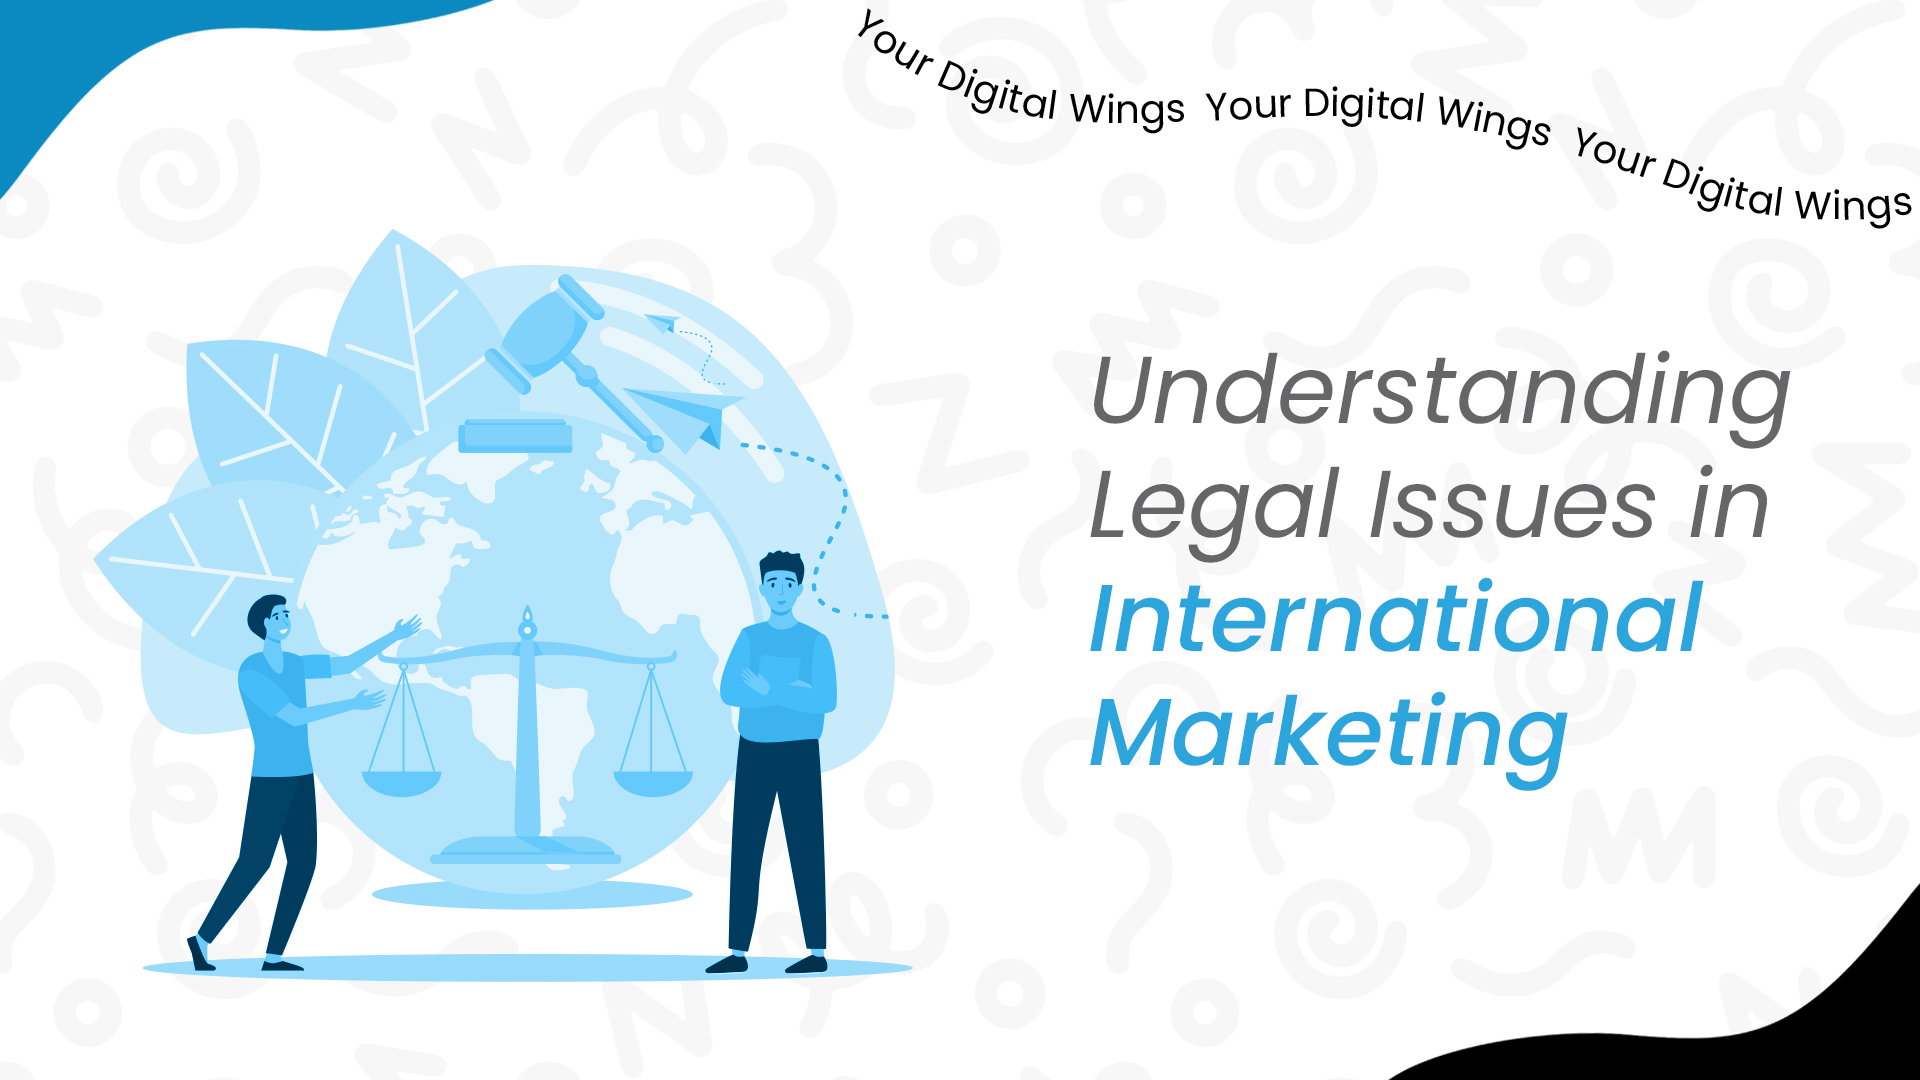 Legal issues in international marketing